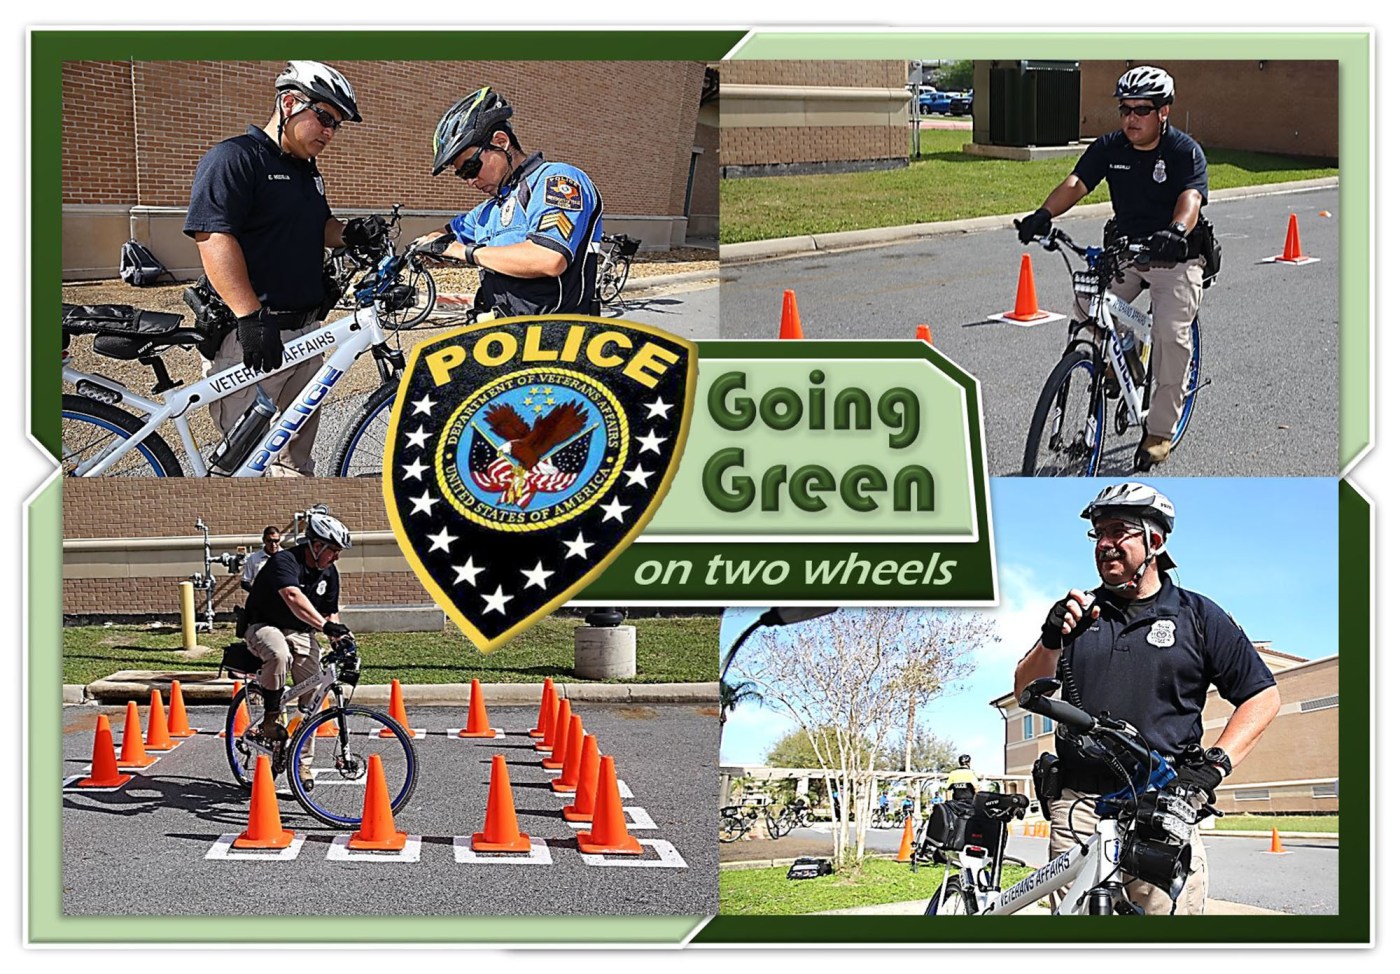 Police officers at VA Texas Valley Coastal Bend Health Care System (VCB) are helping the environment by going green on two wheels with the addition of bicycle patrols. (VA photo illustration by Luis H. Loza Gutierrez)